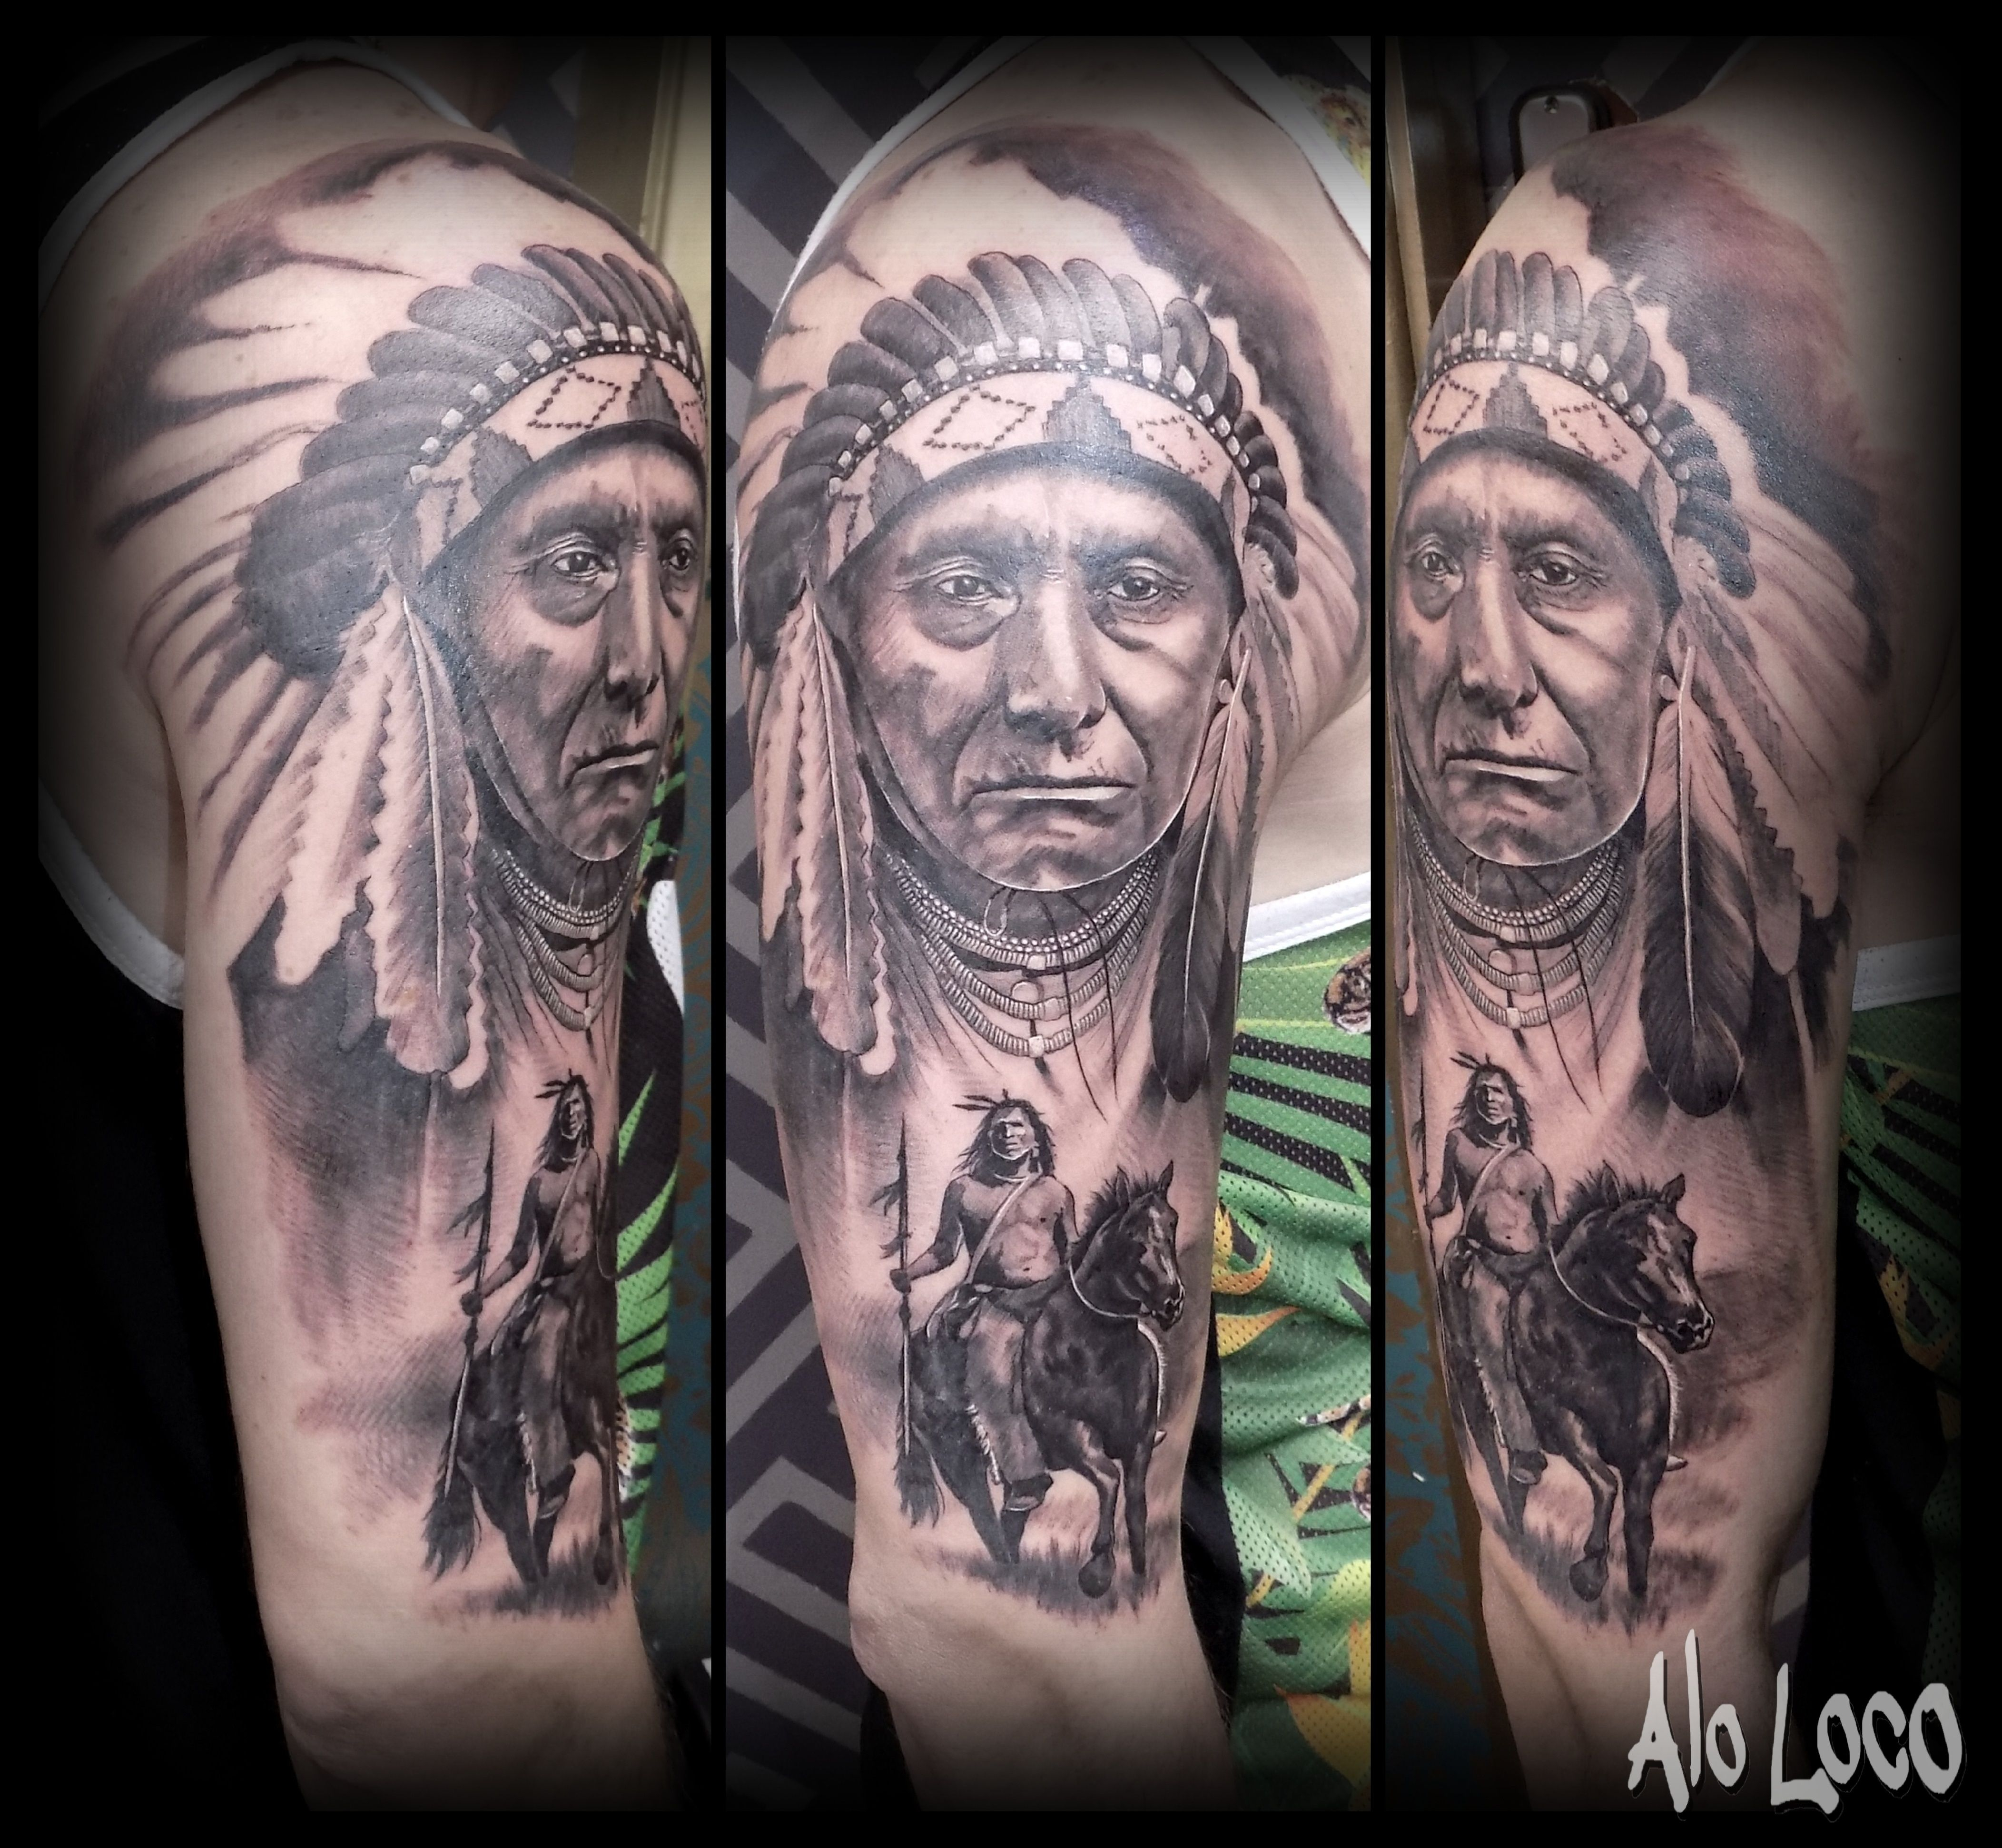 Native American Indios Half Sleeve Black And Grey Tattoos Alo in dimensions 4207 X 3884